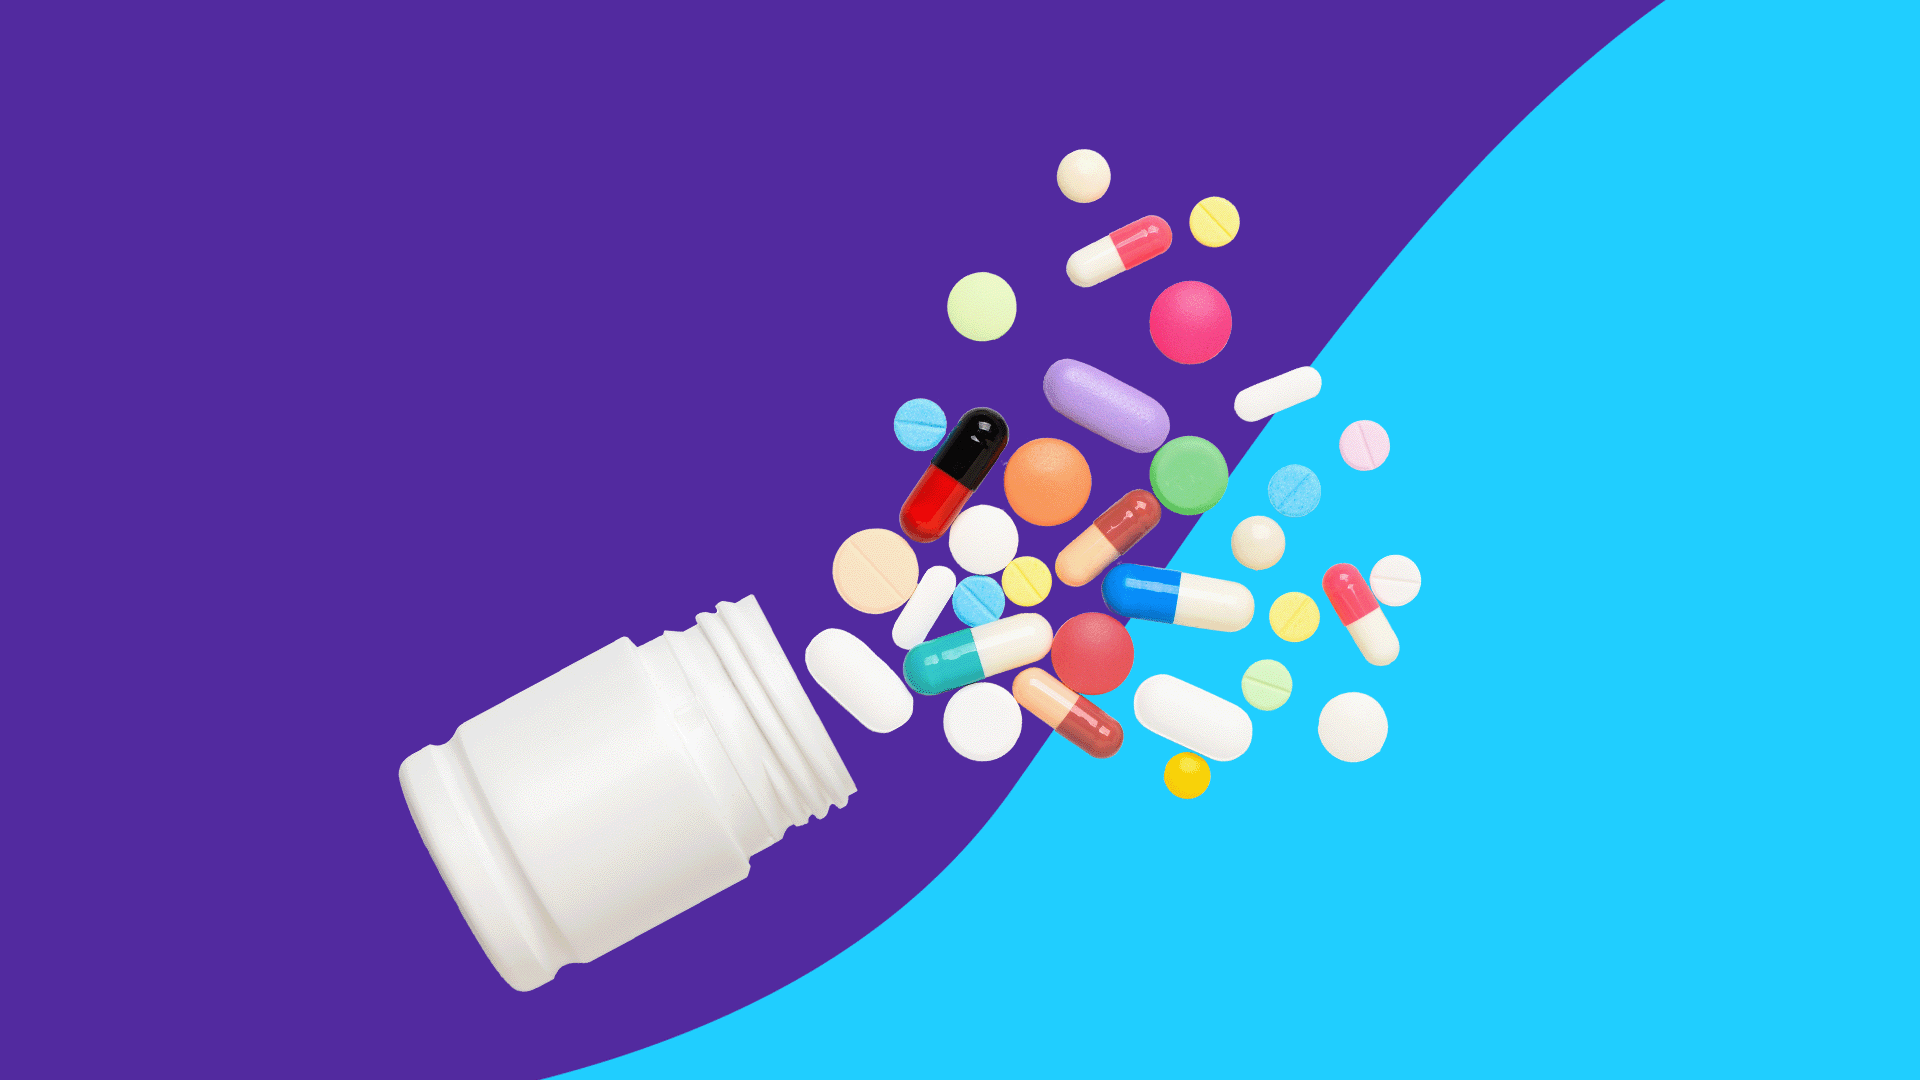 Rx pill bottle: What can I take instead of Brilinta?